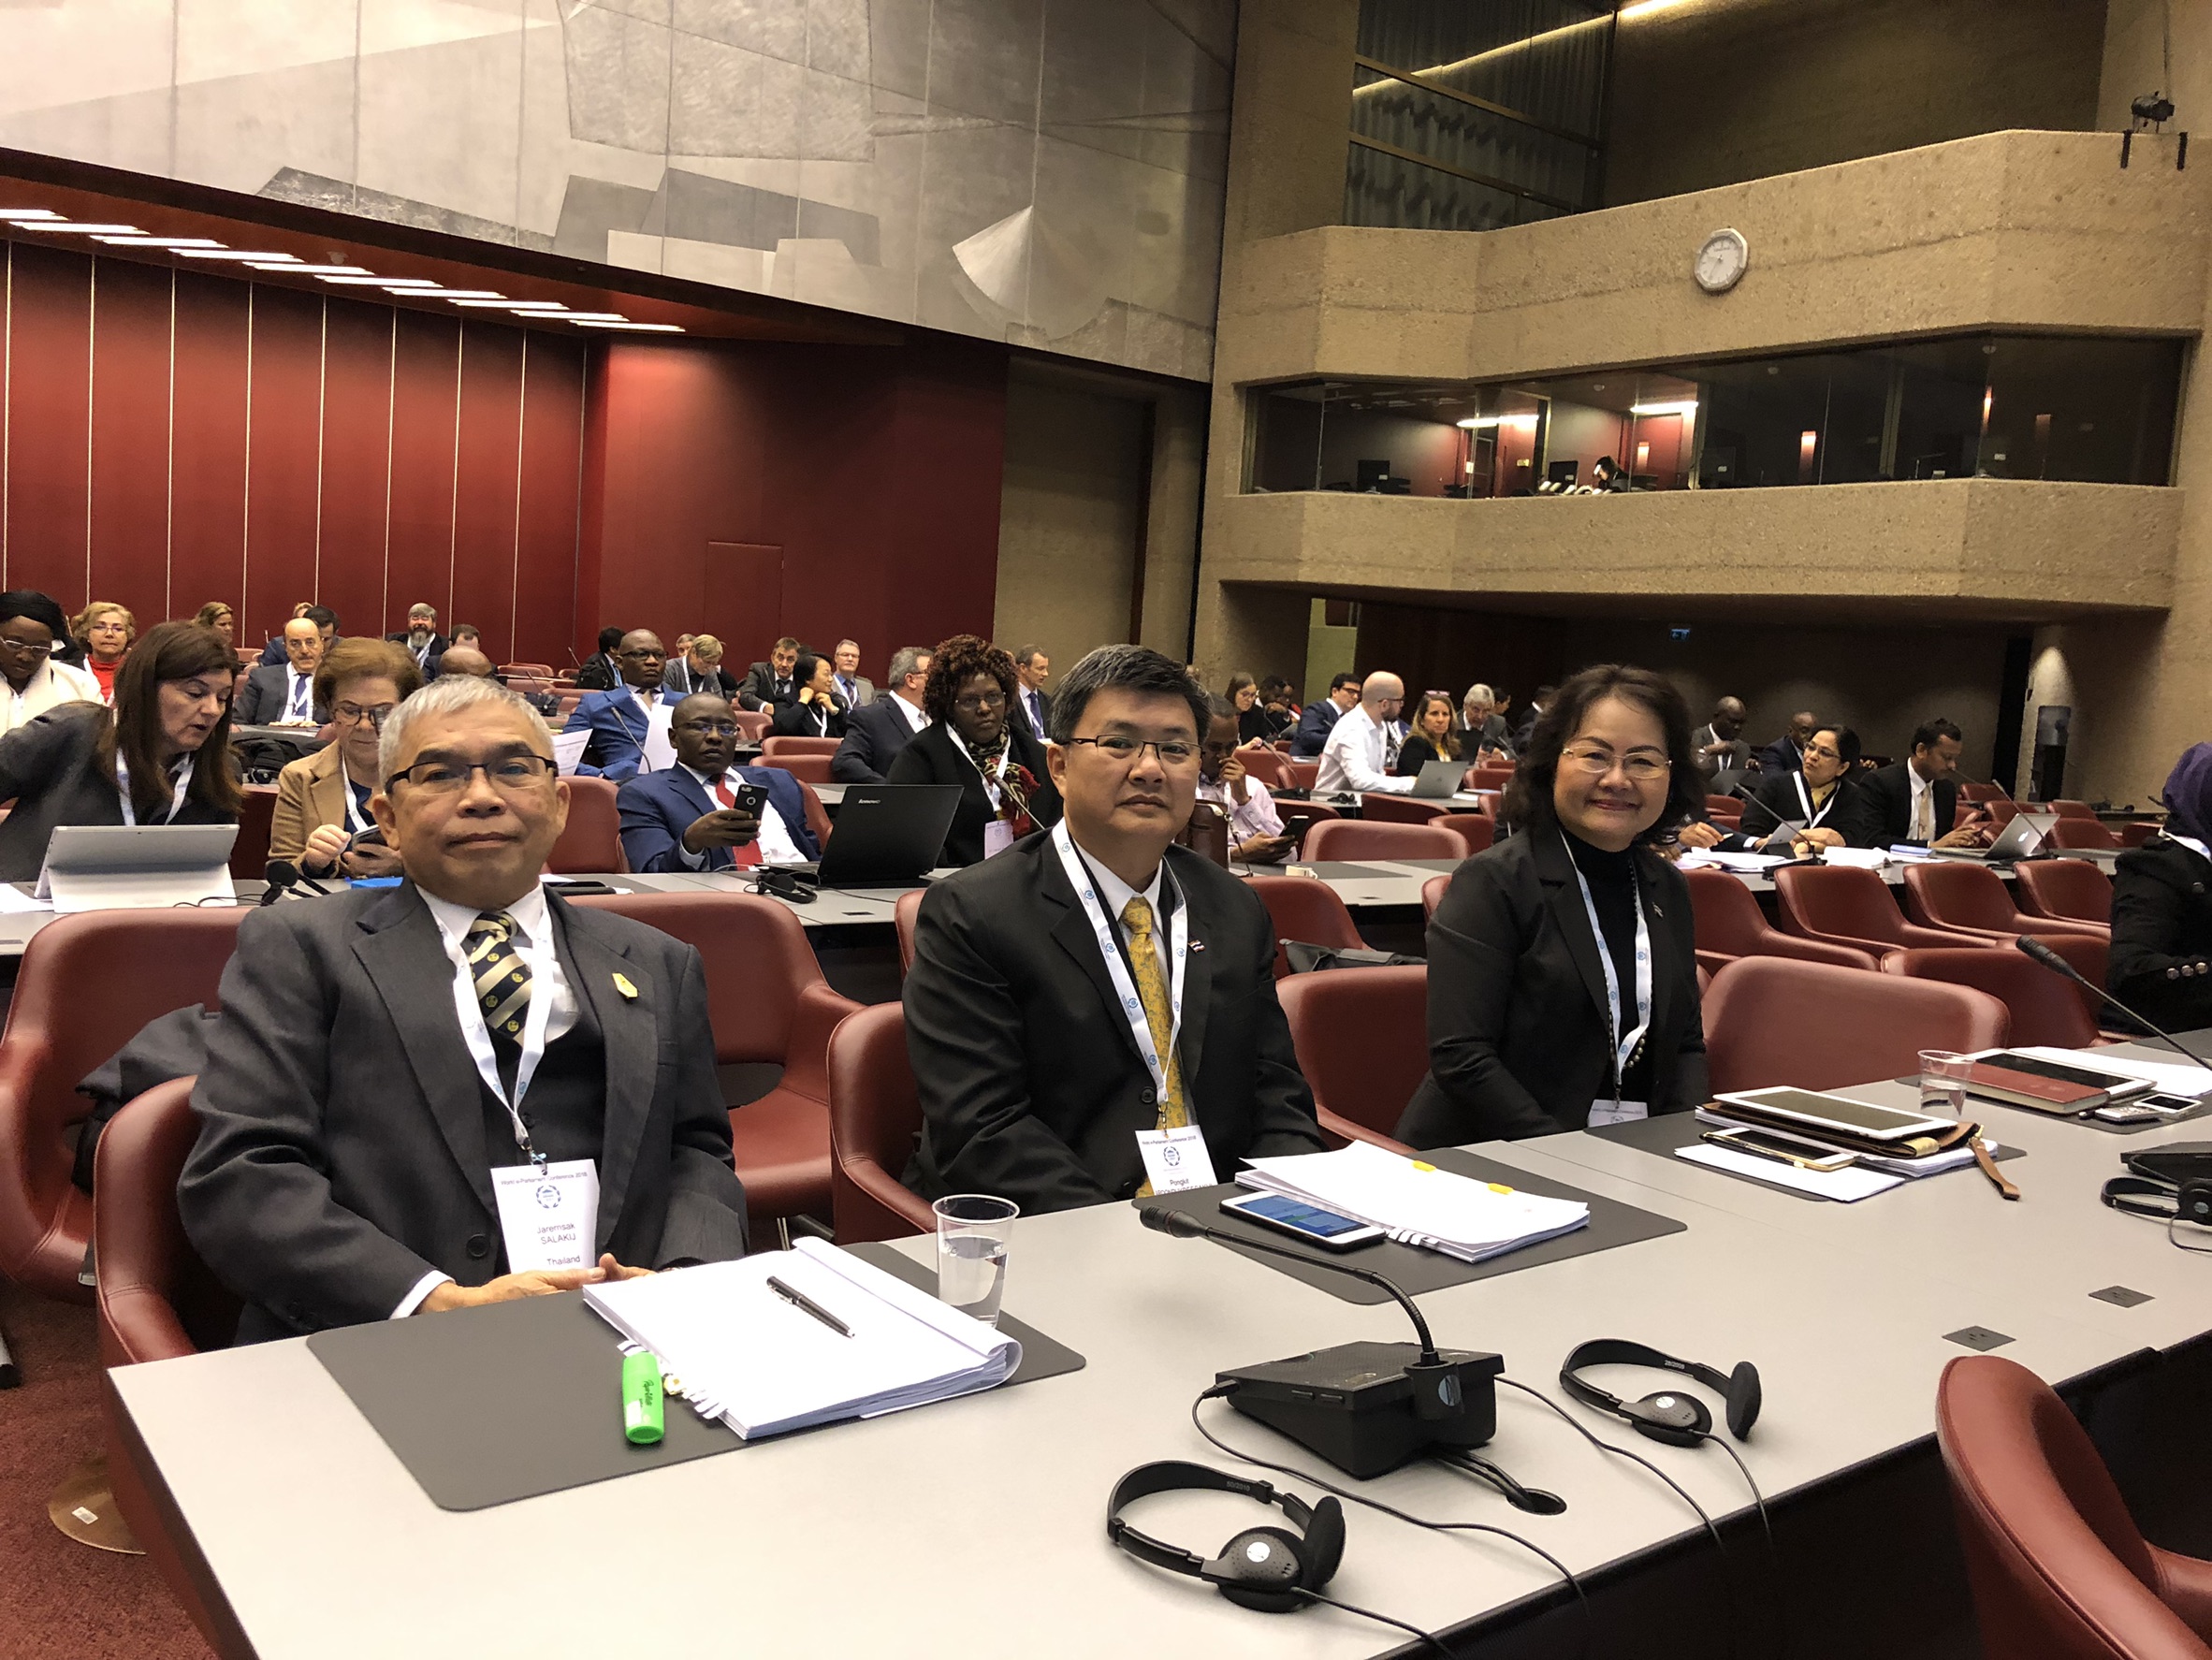 3-5 December 2018, at the International Conference Centre (CICG), Geneva, the Swiss Confederation